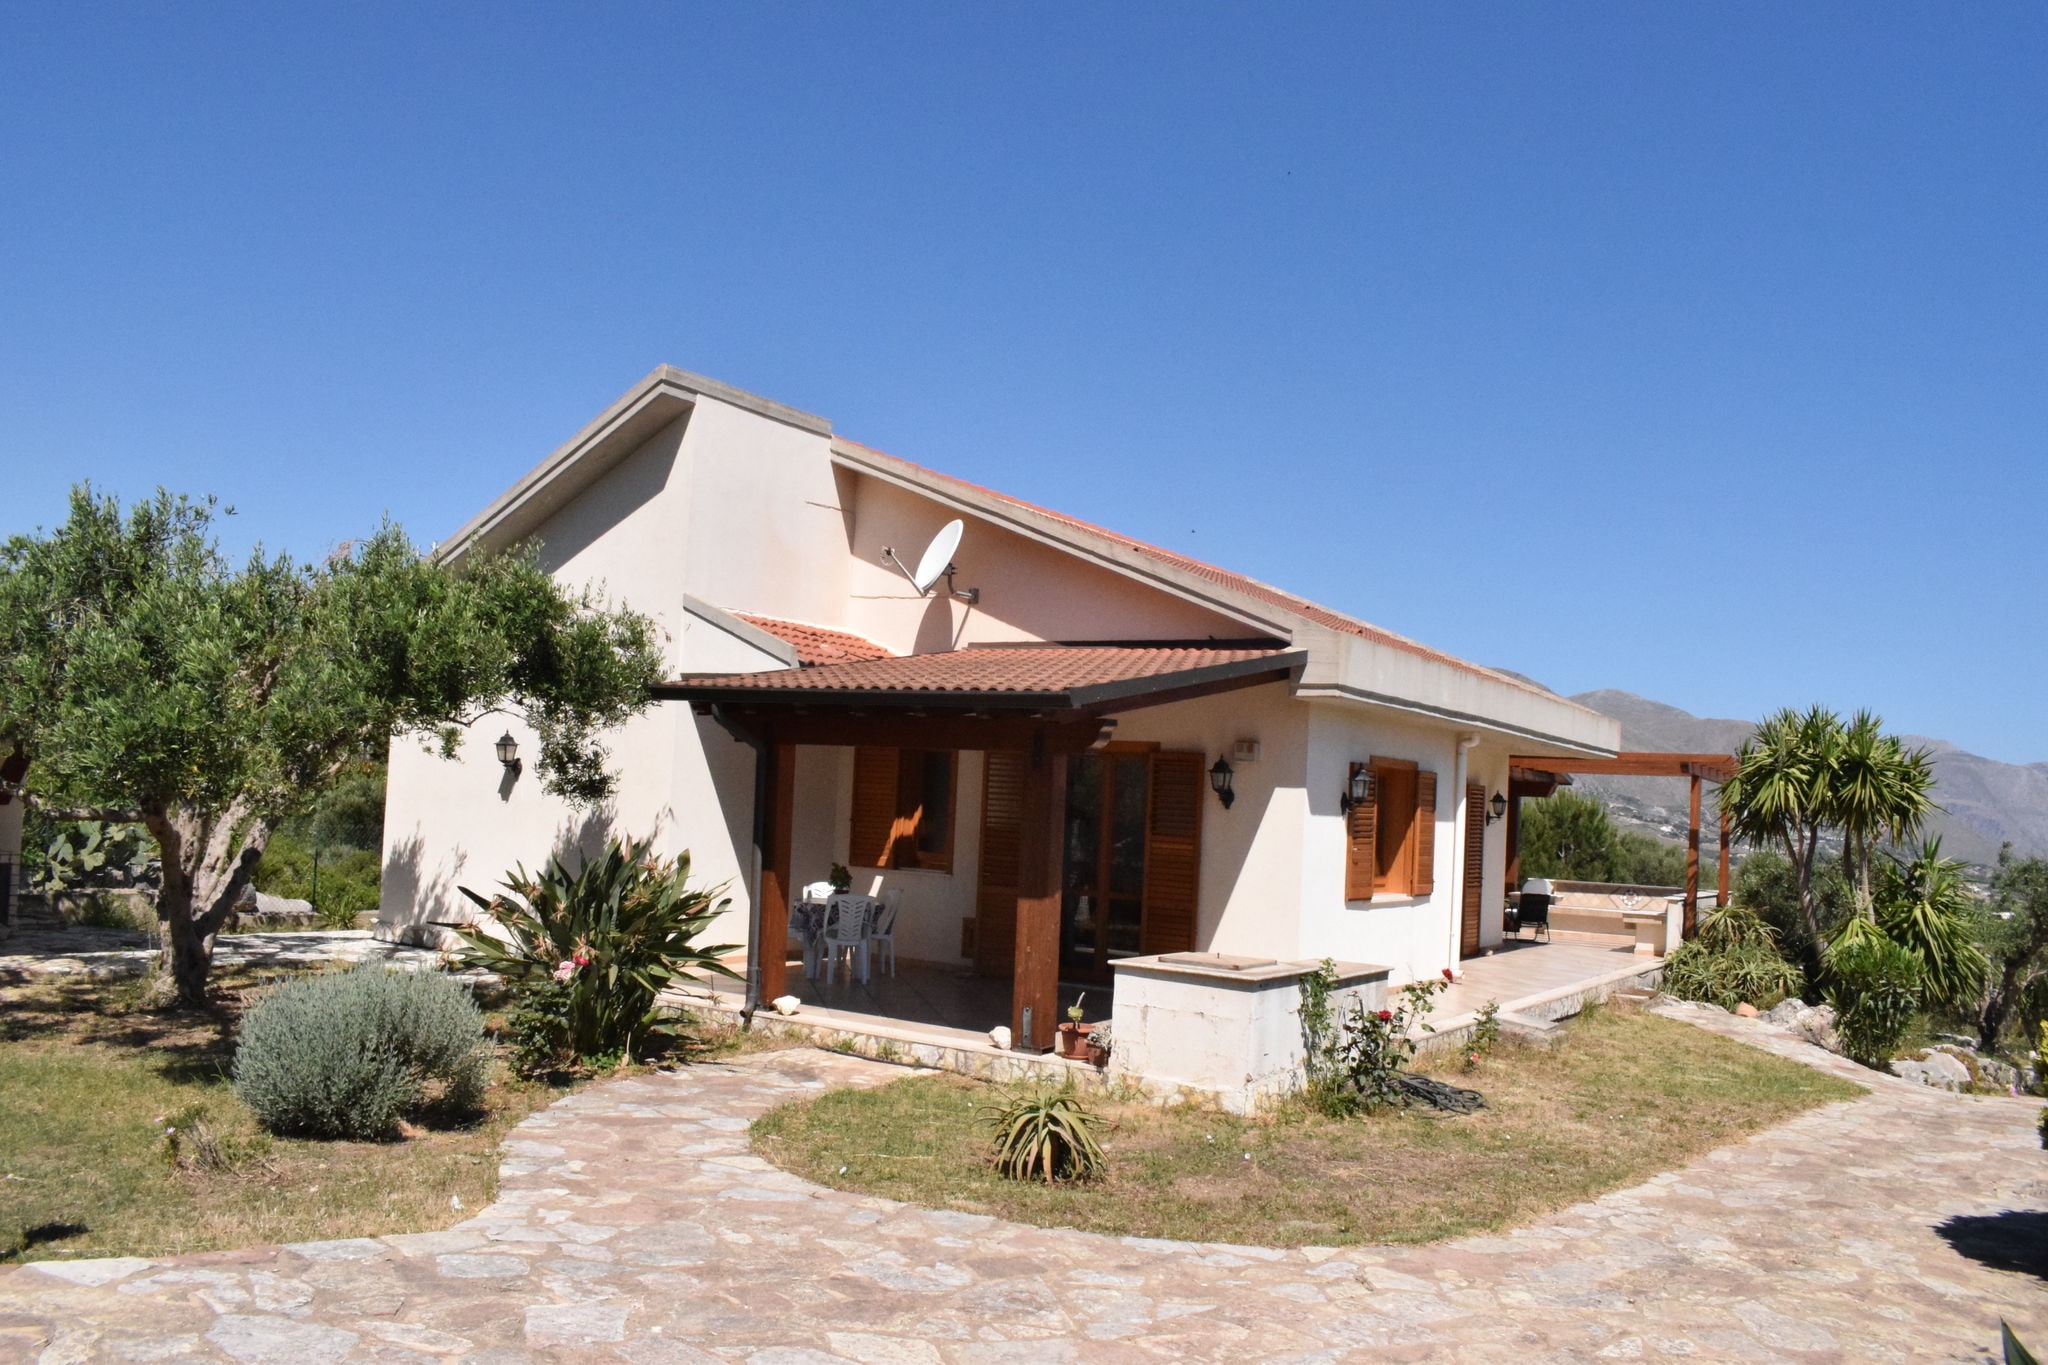 Detached villa located in a residential area a few kilometers from the sea.